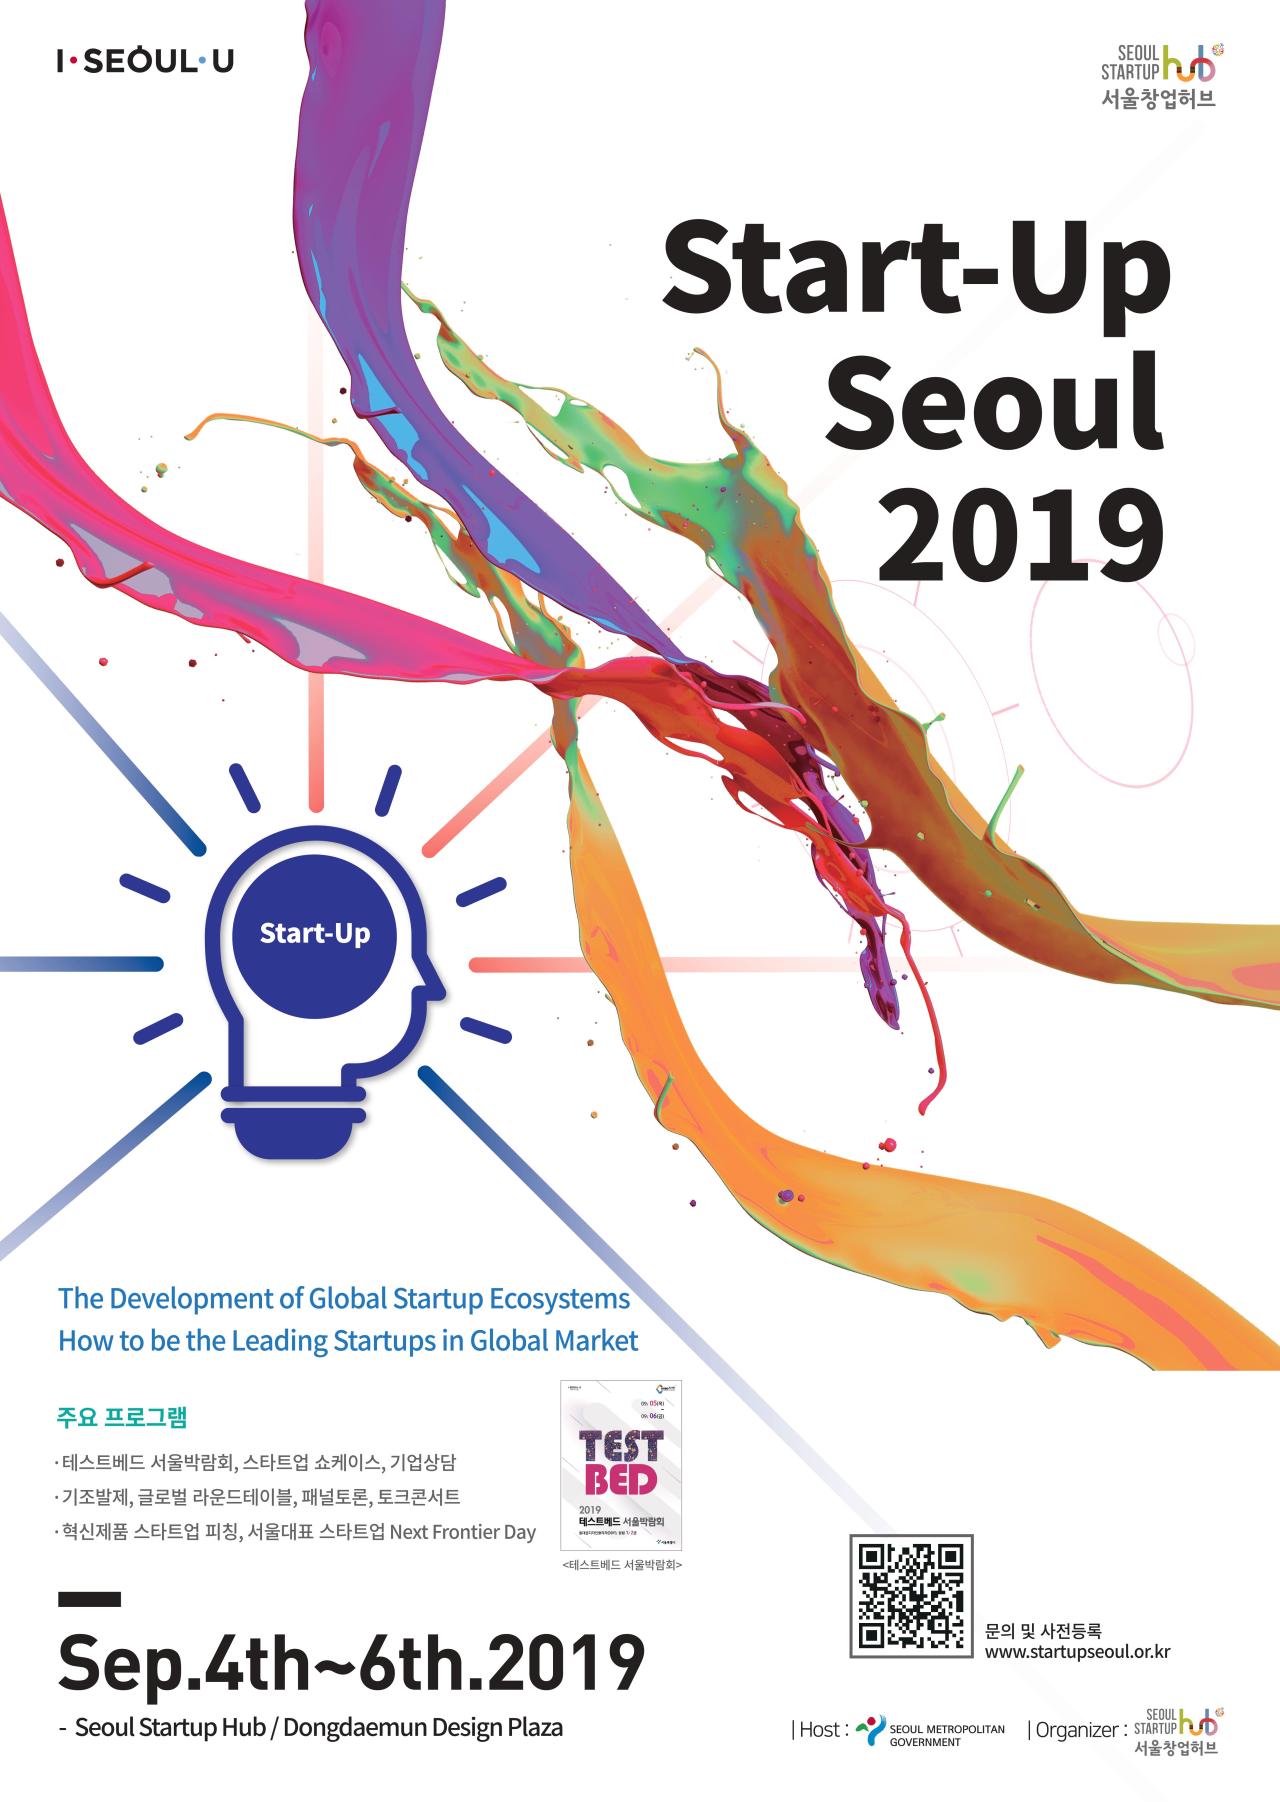 A poster for “Start-Up Seoul: Tech-Rise 2019” (Seoul Metropolitan Government)